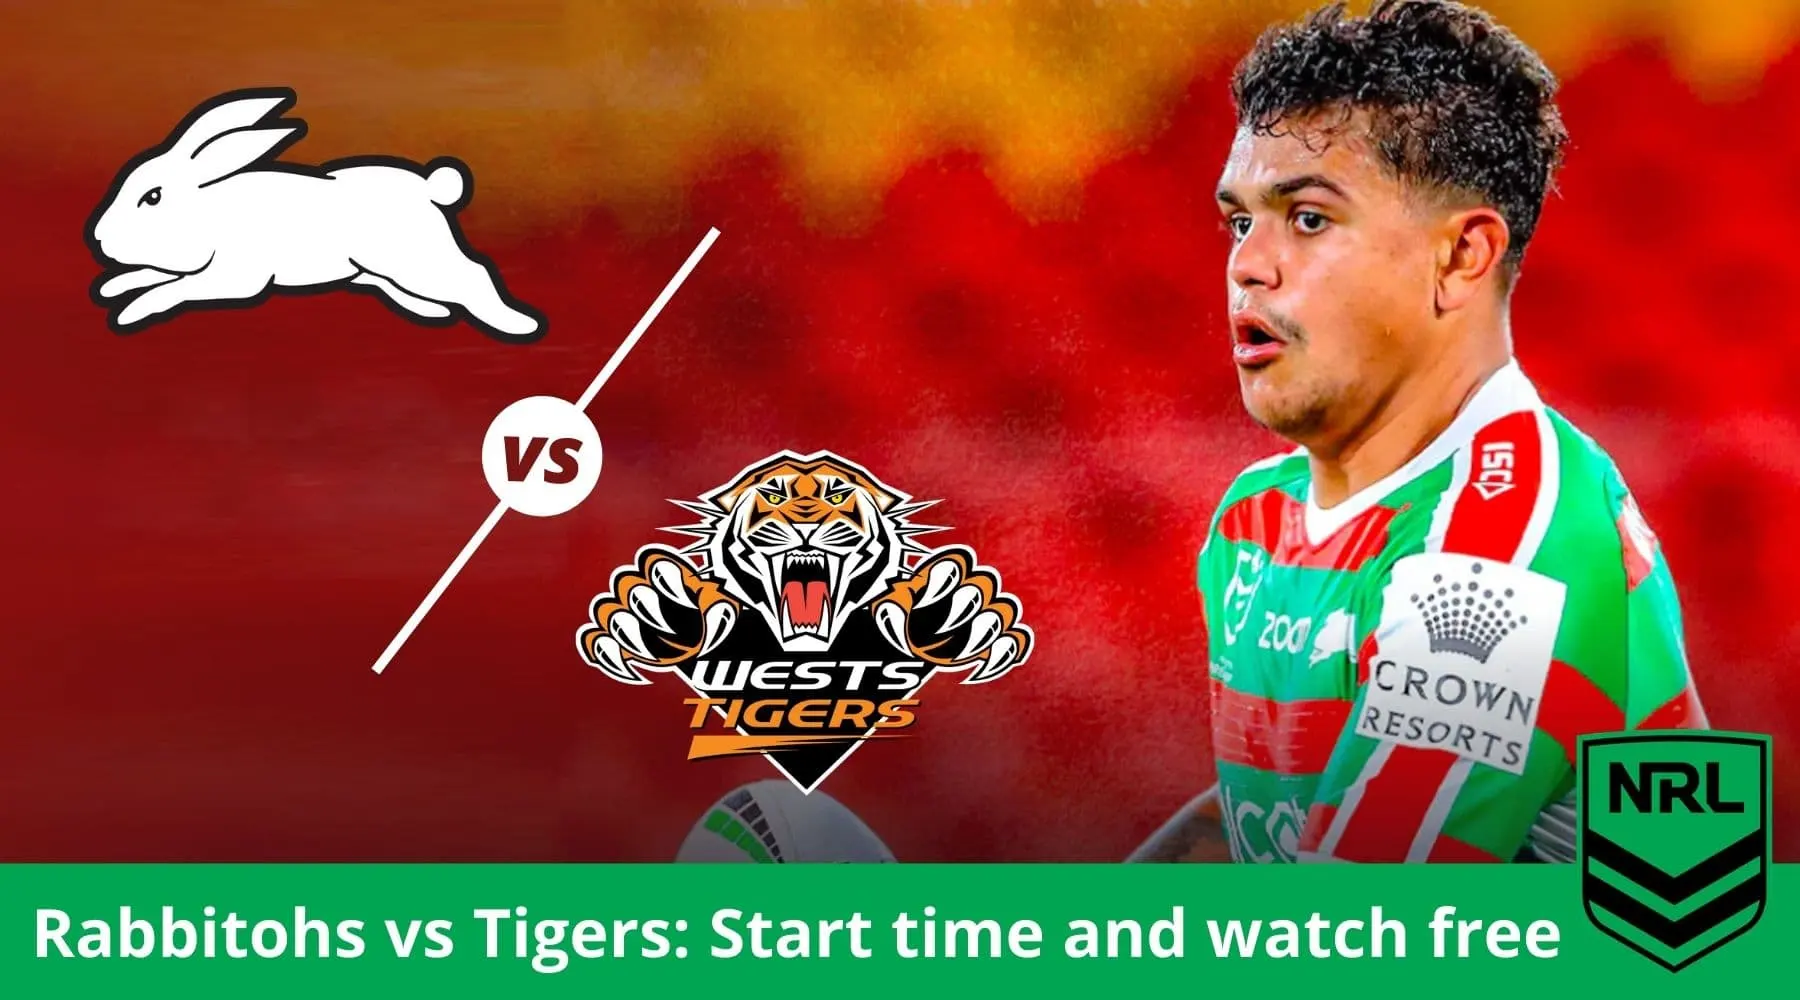 Watch Rabbitohs vs Tigers NRL live stream and match preview